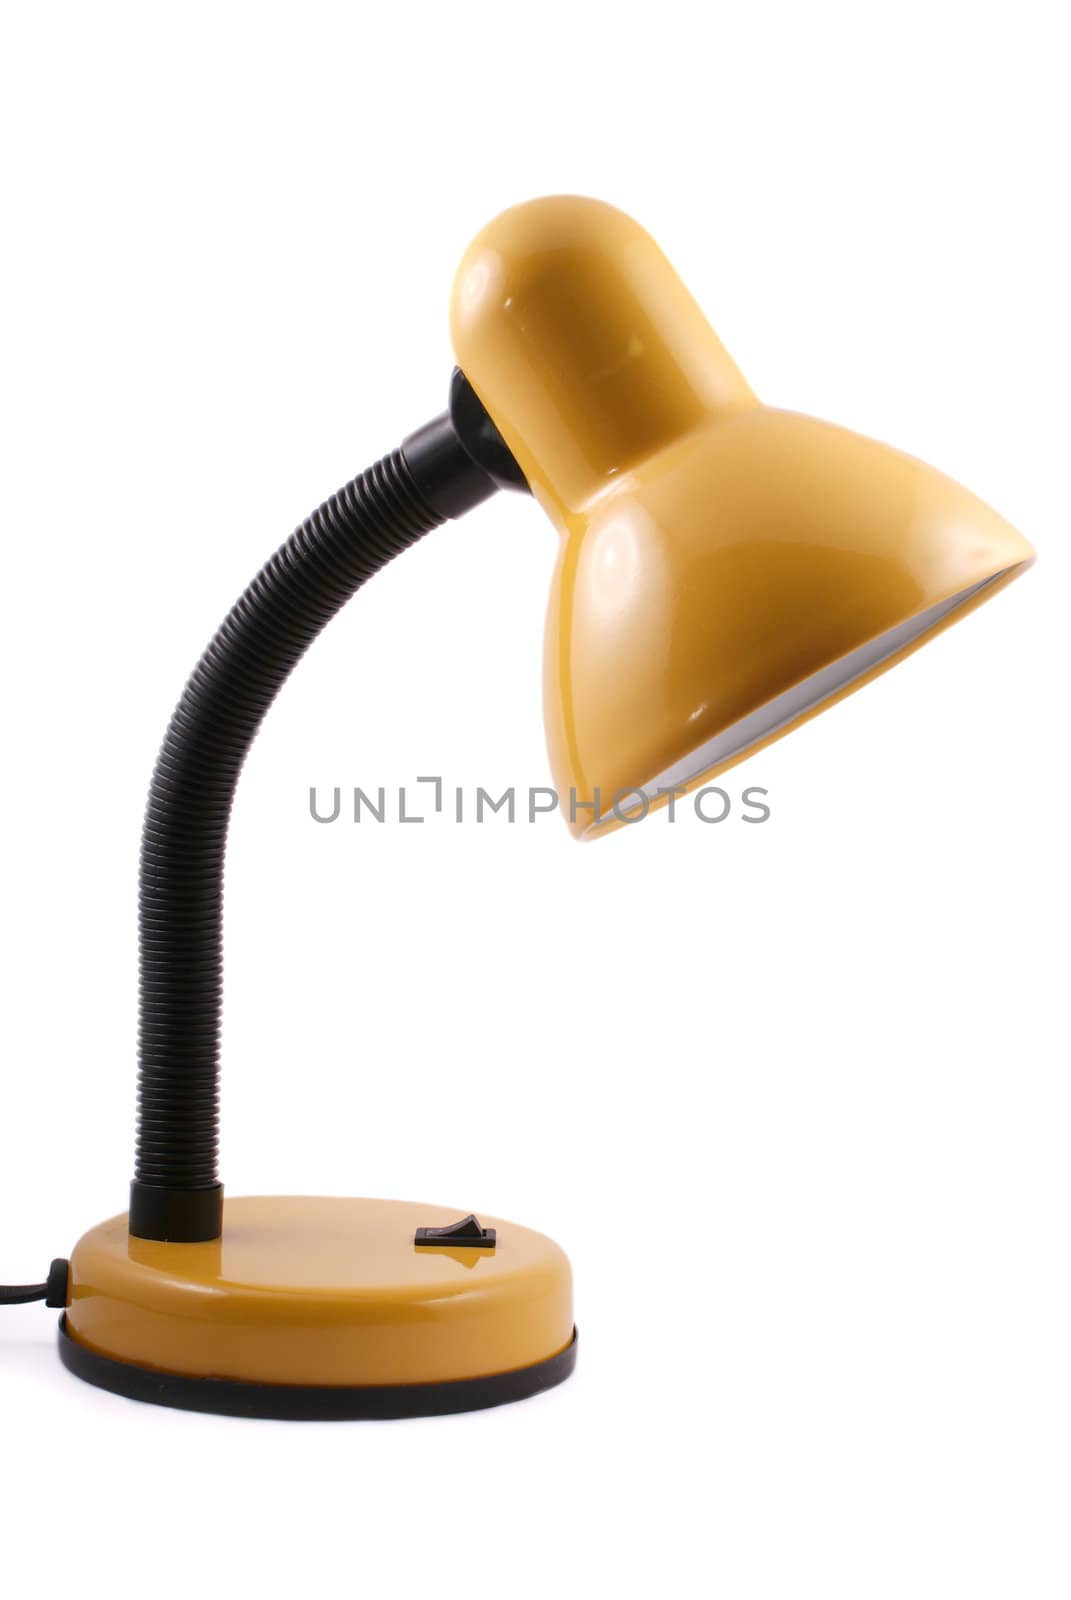 yellow desk-lamp isolated on white background